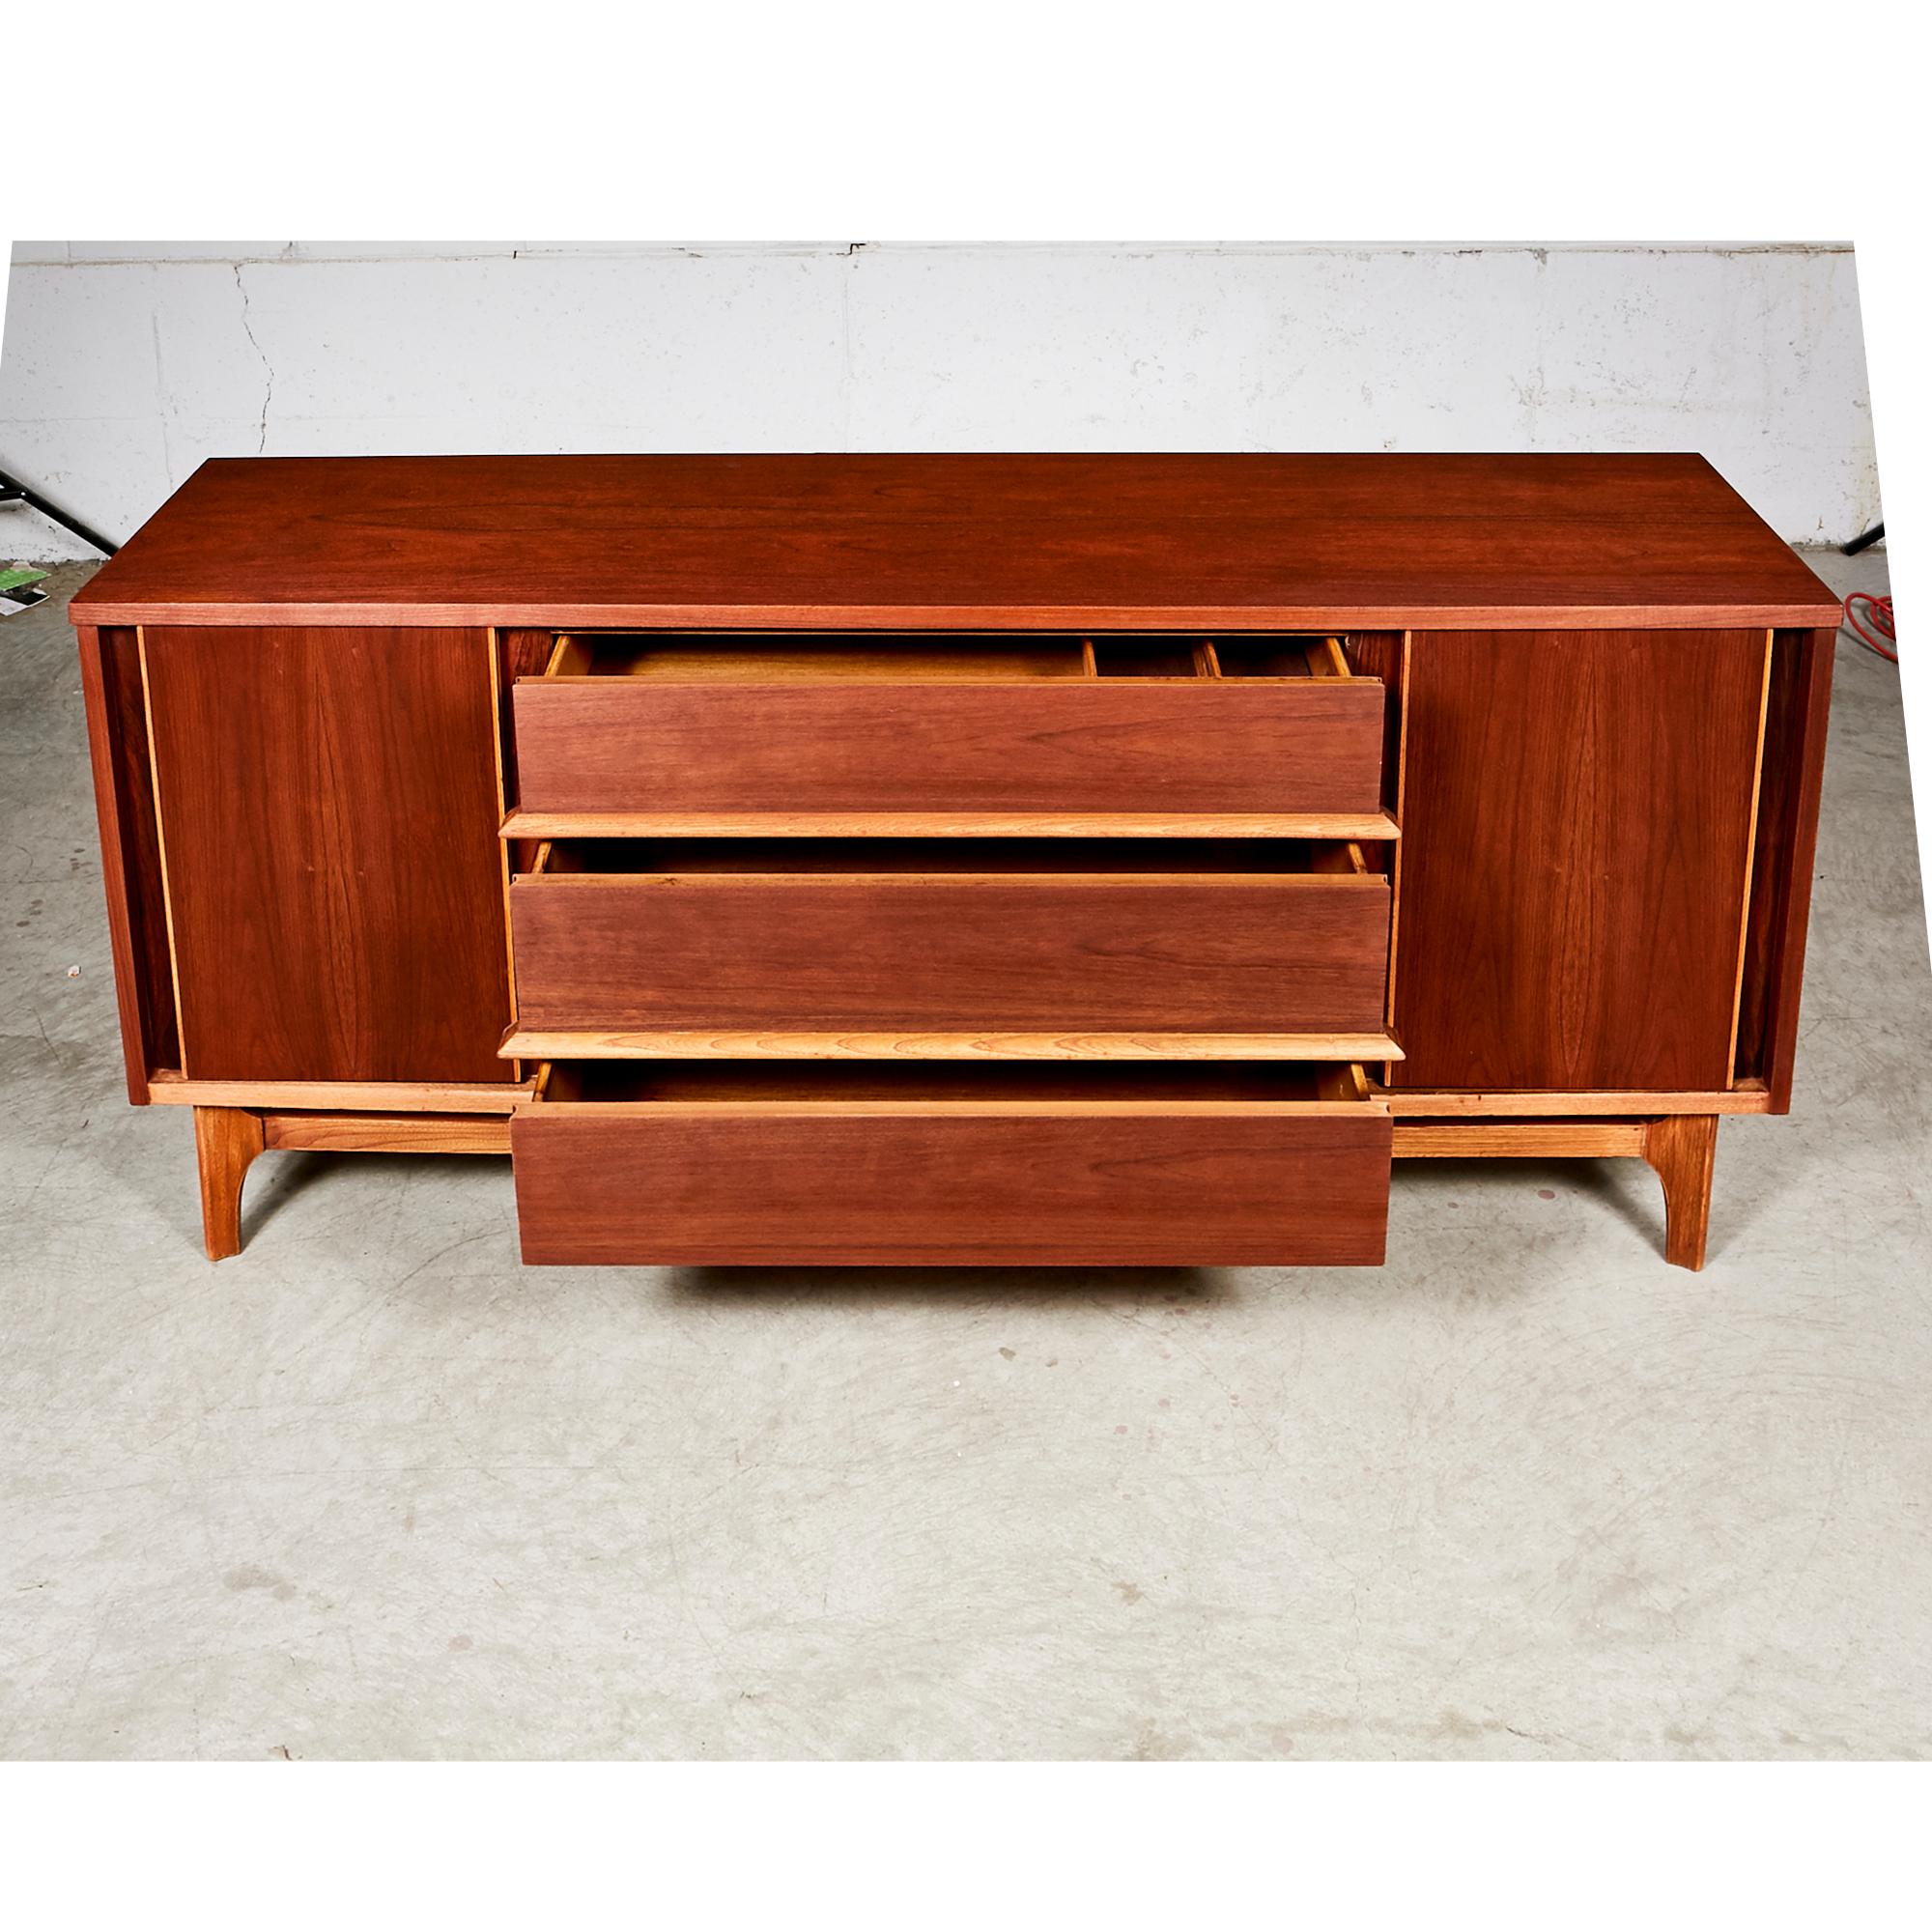 Mid-Century Modern Walnut Wood Sideboard In Good Condition For Sale In Amherst, NH